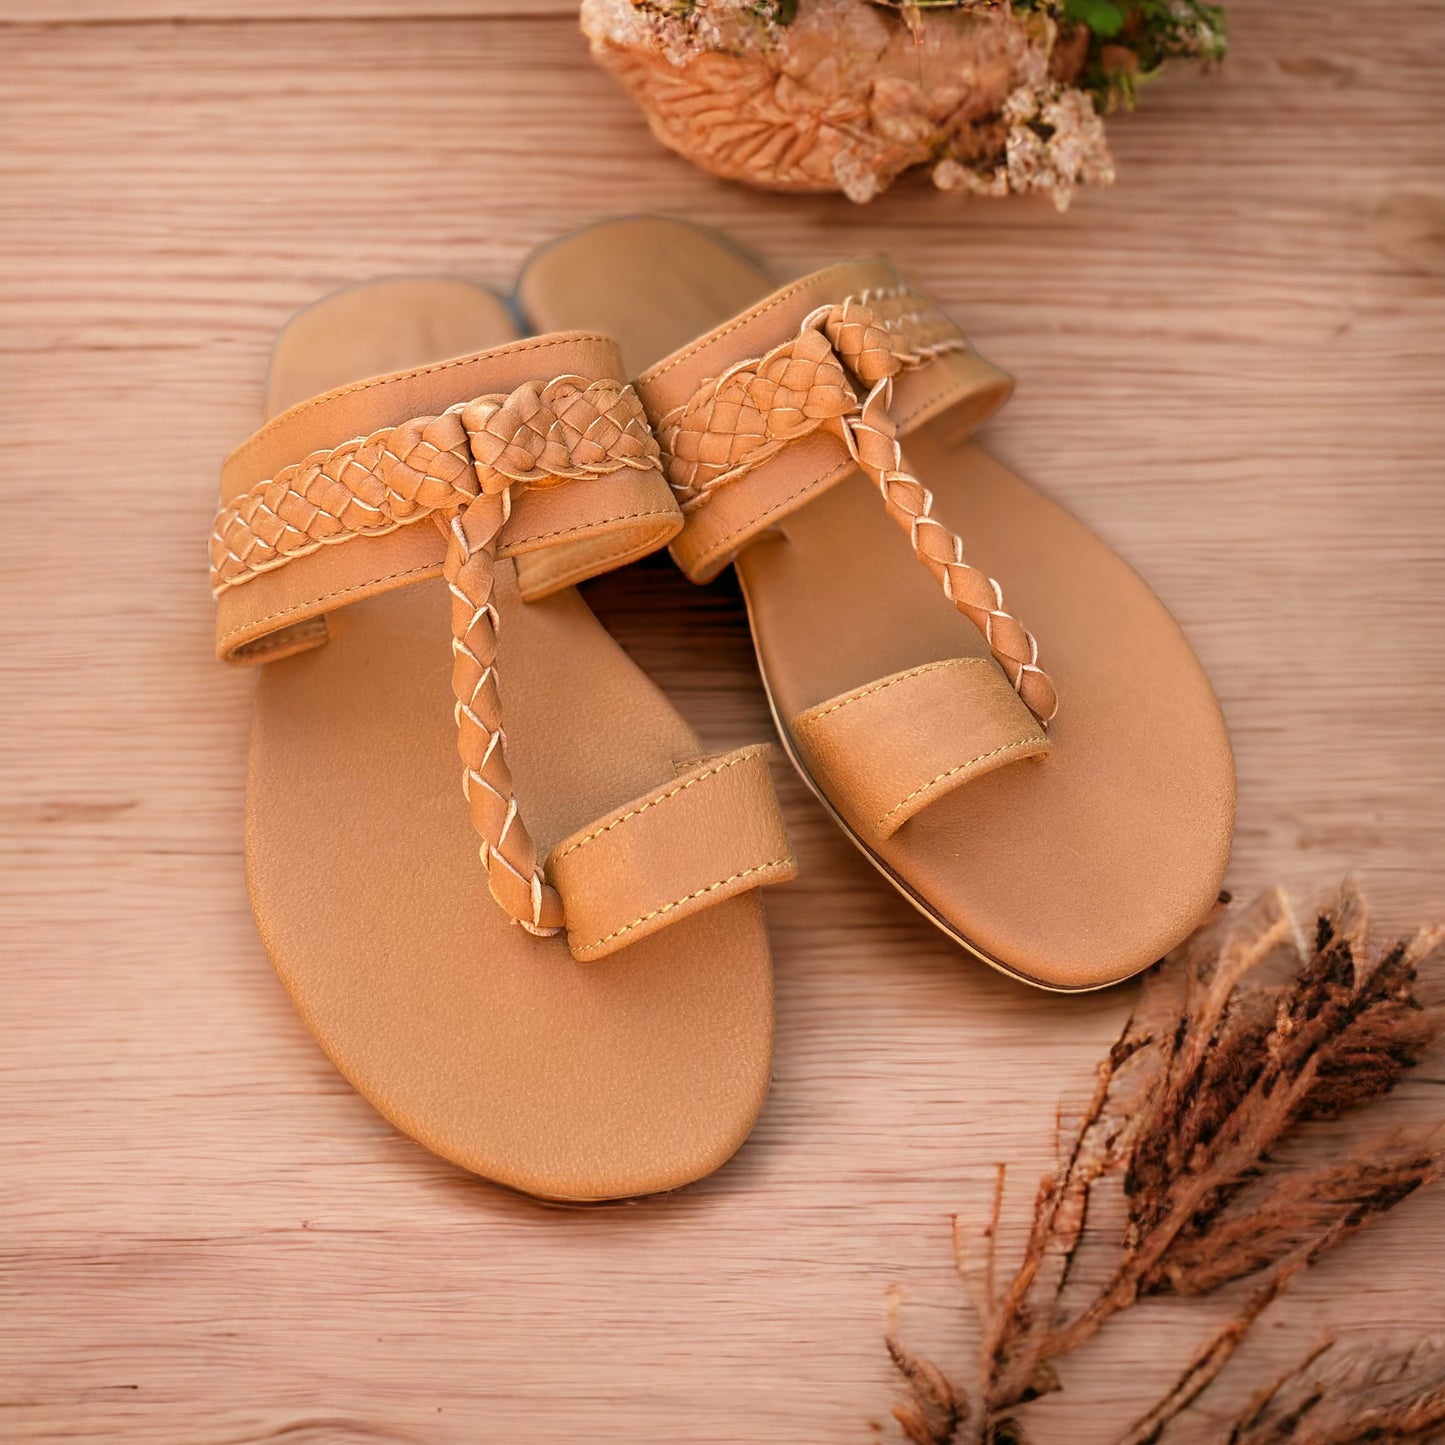 Leather Indian Toe Sandals